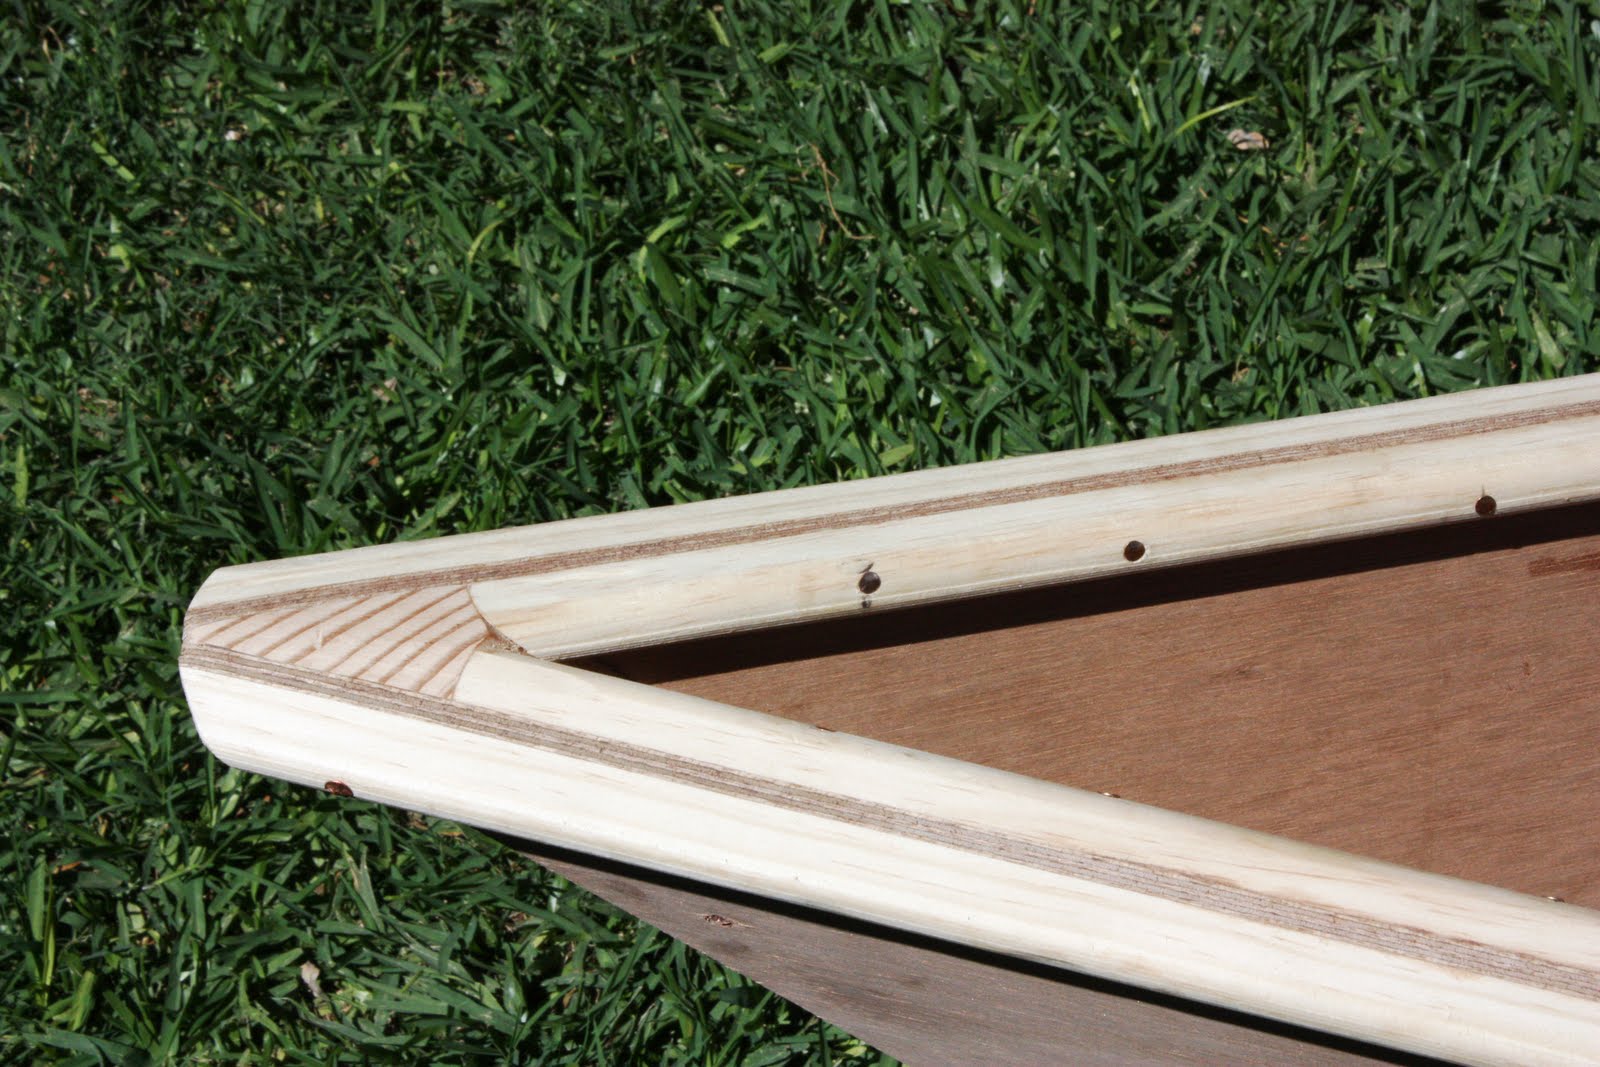  you that want to learn to build your own boat. http://www.bulwarks.us